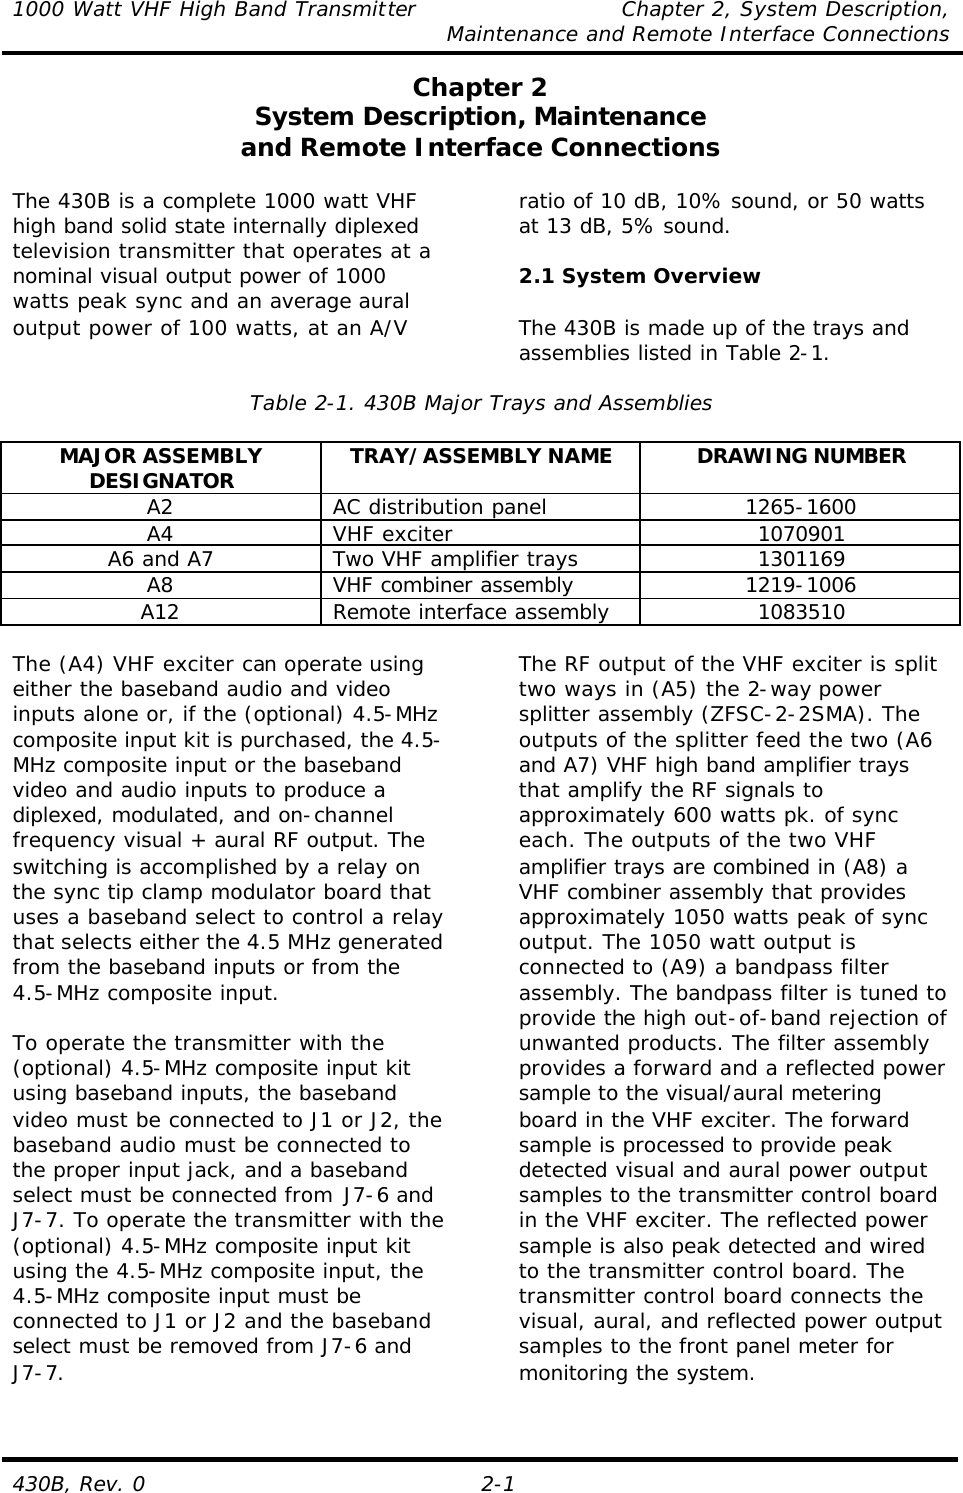 1000 Watt VHF High Band Transmitter    Chapter 2, System Description,     Maintenance and Remote Interface Connections 430B, Rev. 0 2-1 Chapter 2 System Description, Maintenance and Remote Interface Connections  The 430B is a complete 1000 watt VHF high band solid state internally diplexed television transmitter that operates at a nominal visual output power of 1000 watts peak sync and an average aural output power of 100 watts, at an A/V ratio of 10 dB, 10% sound, or 50 watts at 13 dB, 5% sound.  2.1 System Overview  The 430B is made up of the trays and assemblies listed in Table 2-1.  Table 2-1. 430B Major Trays and Assemblies  MAJOR ASSEMBLY DESIGNATOR TRAY/ASSEMBLY NAME DRAWING NUMBER A2 AC distribution panel 1265-1600 A4 VHF exciter 1070901 A6 and A7 Two VHF amplifier trays 1301169 A8 VHF combiner assembly 1219-1006 A12 Remote interface assembly 1083510  The (A4) VHF exciter can operate using either the baseband audio and video inputs alone or, if the (optional) 4.5-MHz composite input kit is purchased, the 4.5-MHz composite input or the baseband video and audio inputs to produce a diplexed, modulated, and on-channel frequency visual + aural RF output. The switching is accomplished by a relay on the sync tip clamp modulator board that uses a baseband select to control a relay that selects either the 4.5 MHz generated from the baseband inputs or from the 4.5-MHz composite input.  To operate the transmitter with the (optional) 4.5-MHz composite input kit using baseband inputs, the baseband video must be connected to J1 or J2, the baseband audio must be connected to the proper input jack, and a baseband select must be connected from J7-6 and J7-7. To operate the transmitter with the (optional) 4.5-MHz composite input kit using the 4.5-MHz composite input, the 4.5-MHz composite input must be connected to J1 or J2 and the baseband select must be removed from J7-6 and J7-7.  The RF output of the VHF exciter is split two ways in (A5) the 2-way power splitter assembly (ZFSC-2-2SMA). The outputs of the splitter feed the two (A6 and A7) VHF high band amplifier trays that amplify the RF signals to approximately 600 watts pk. of sync each. The outputs of the two VHF amplifier trays are combined in (A8) a VHF combiner assembly that provides approximately 1050 watts peak of sync output. The 1050 watt output is connected to (A9) a bandpass filter assembly. The bandpass filter is tuned to provide the high out-of-band rejection of unwanted products. The filter assembly provides a forward and a reflected power sample to the visual/aural metering board in the VHF exciter. The forward sample is processed to provide peak detected visual and aural power output samples to the transmitter control board in the VHF exciter. The reflected power sample is also peak detected and wired to the transmitter control board. The transmitter control board connects the visual, aural, and reflected power output samples to the front panel meter for monitoring the system.   